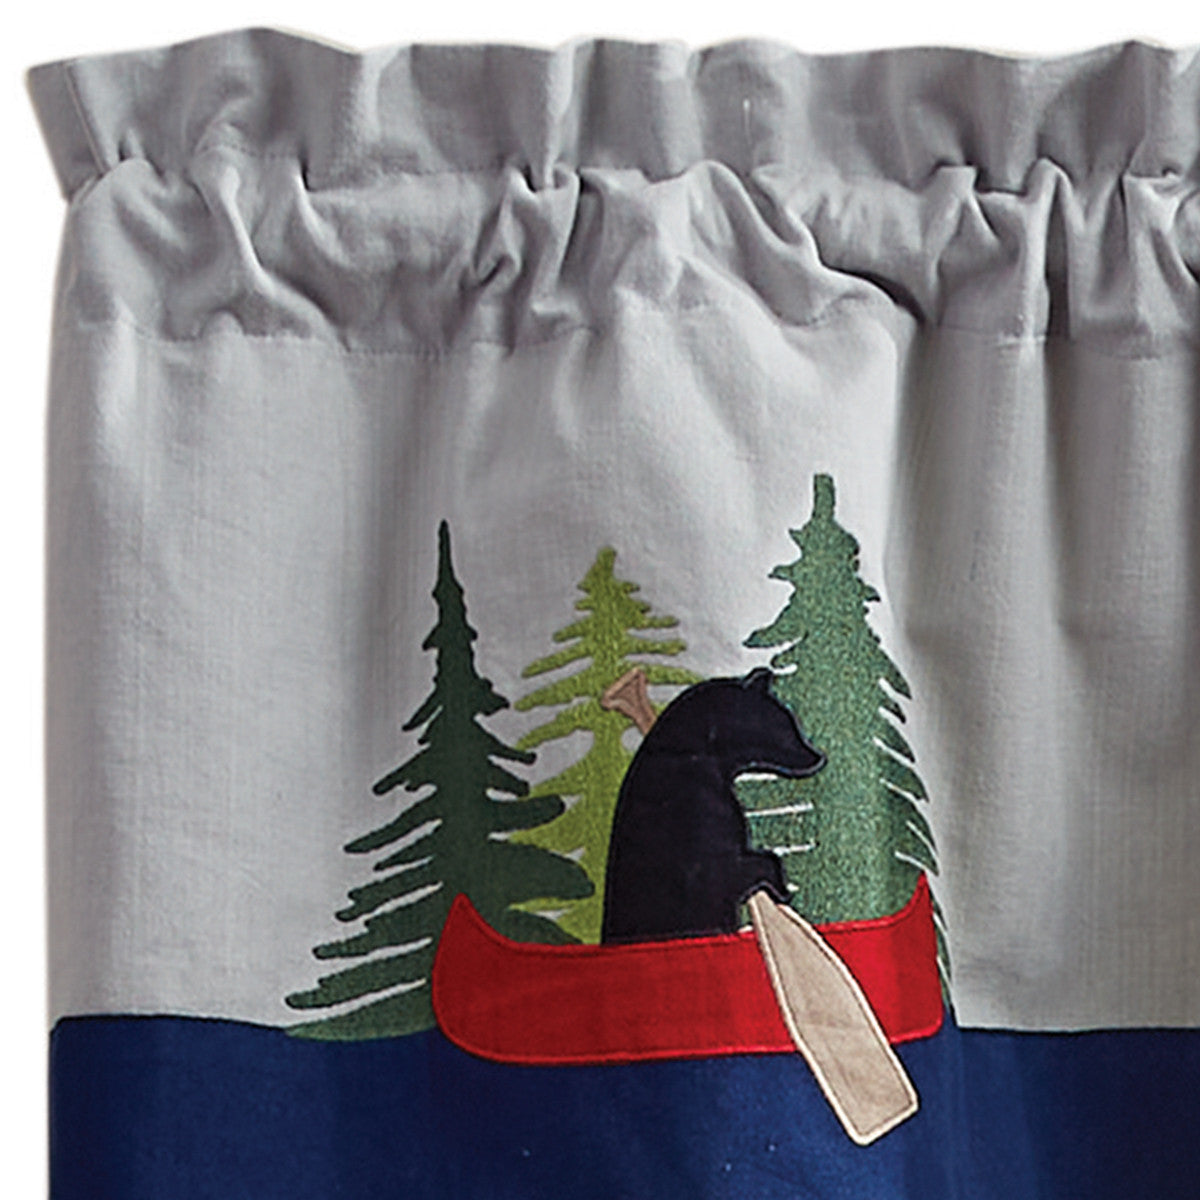 Boundary Waters Appliqued Valance 14"L - Set of 2 Park designs